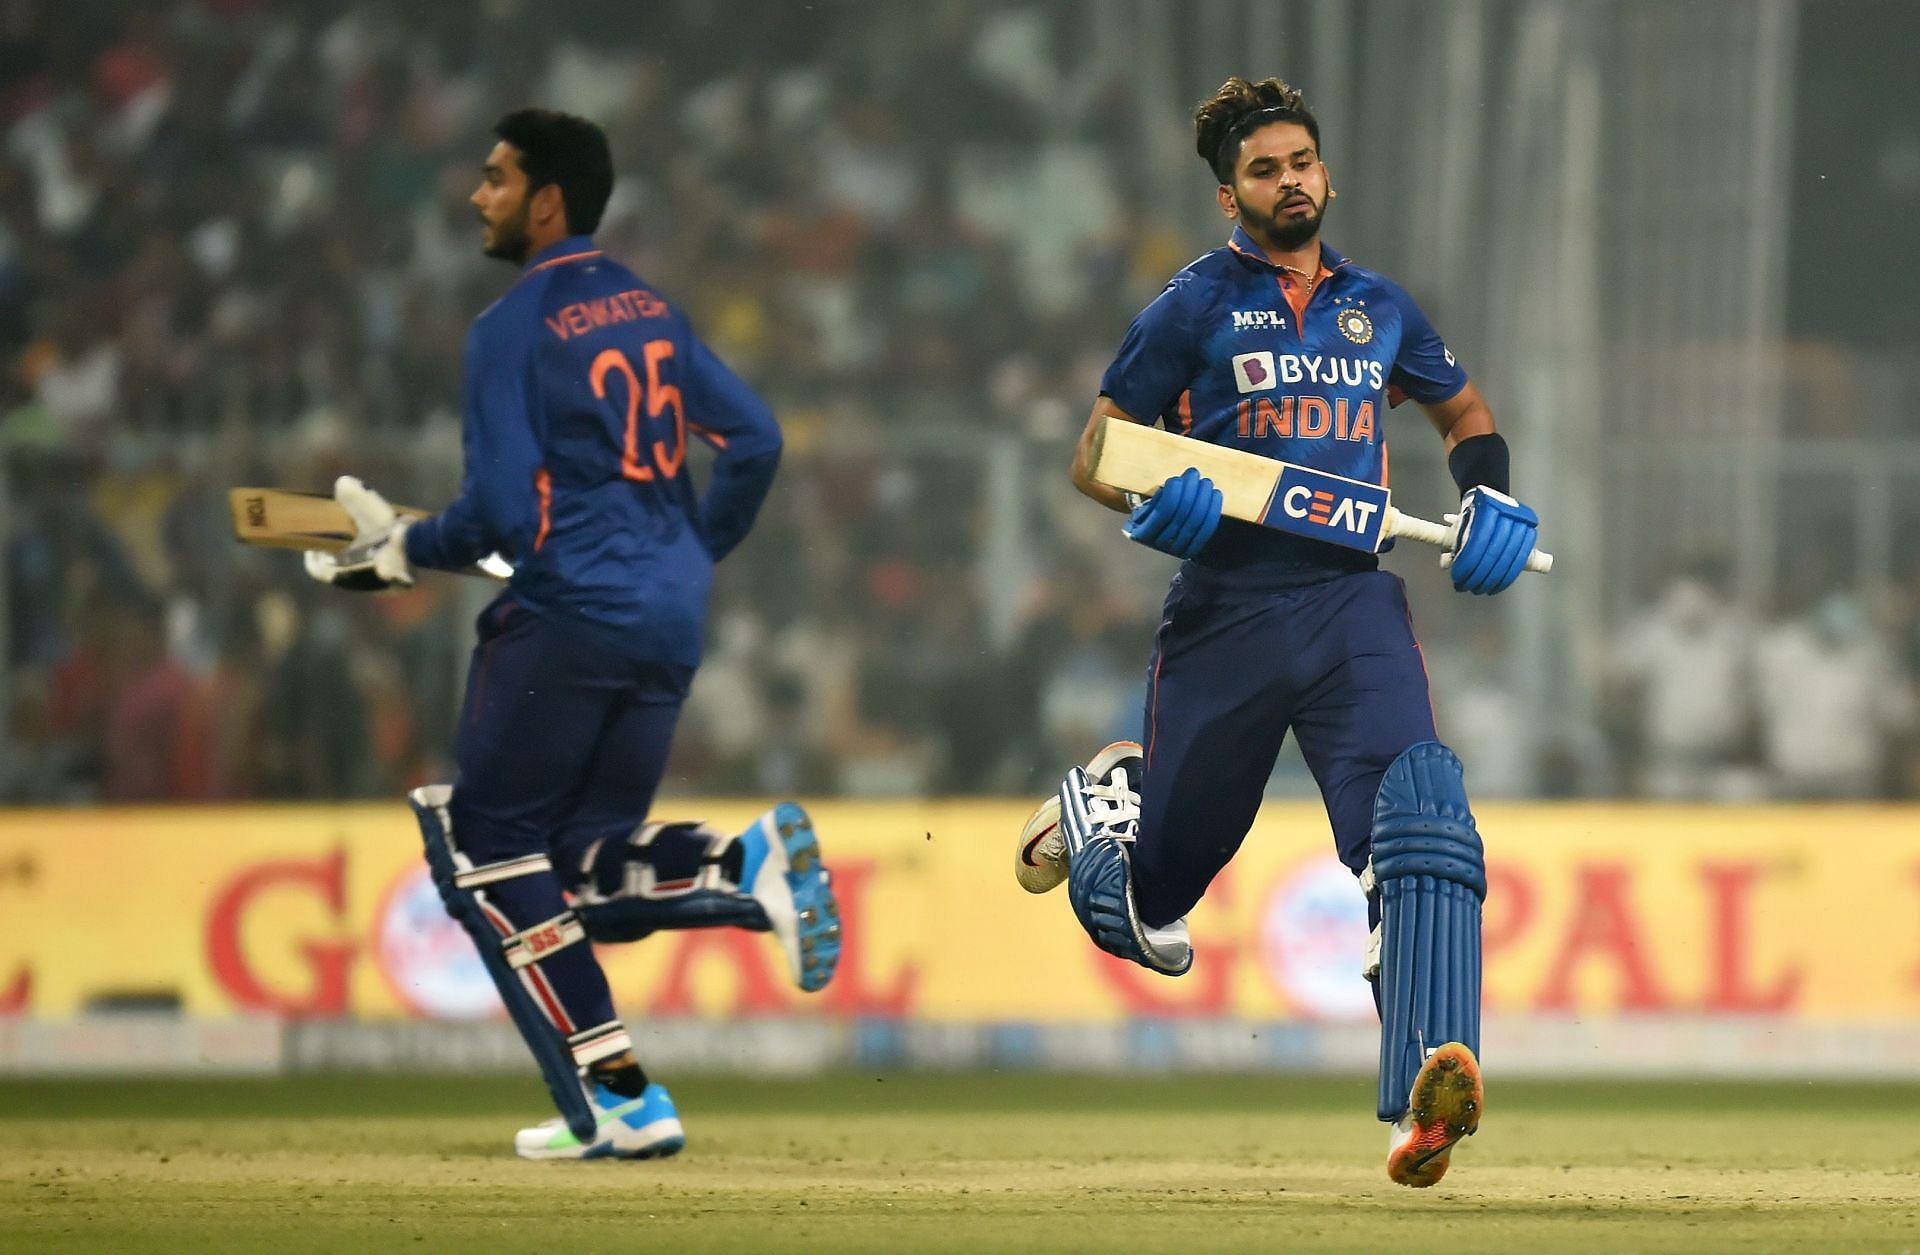 The Men in Blue take on South Africa in Delhi